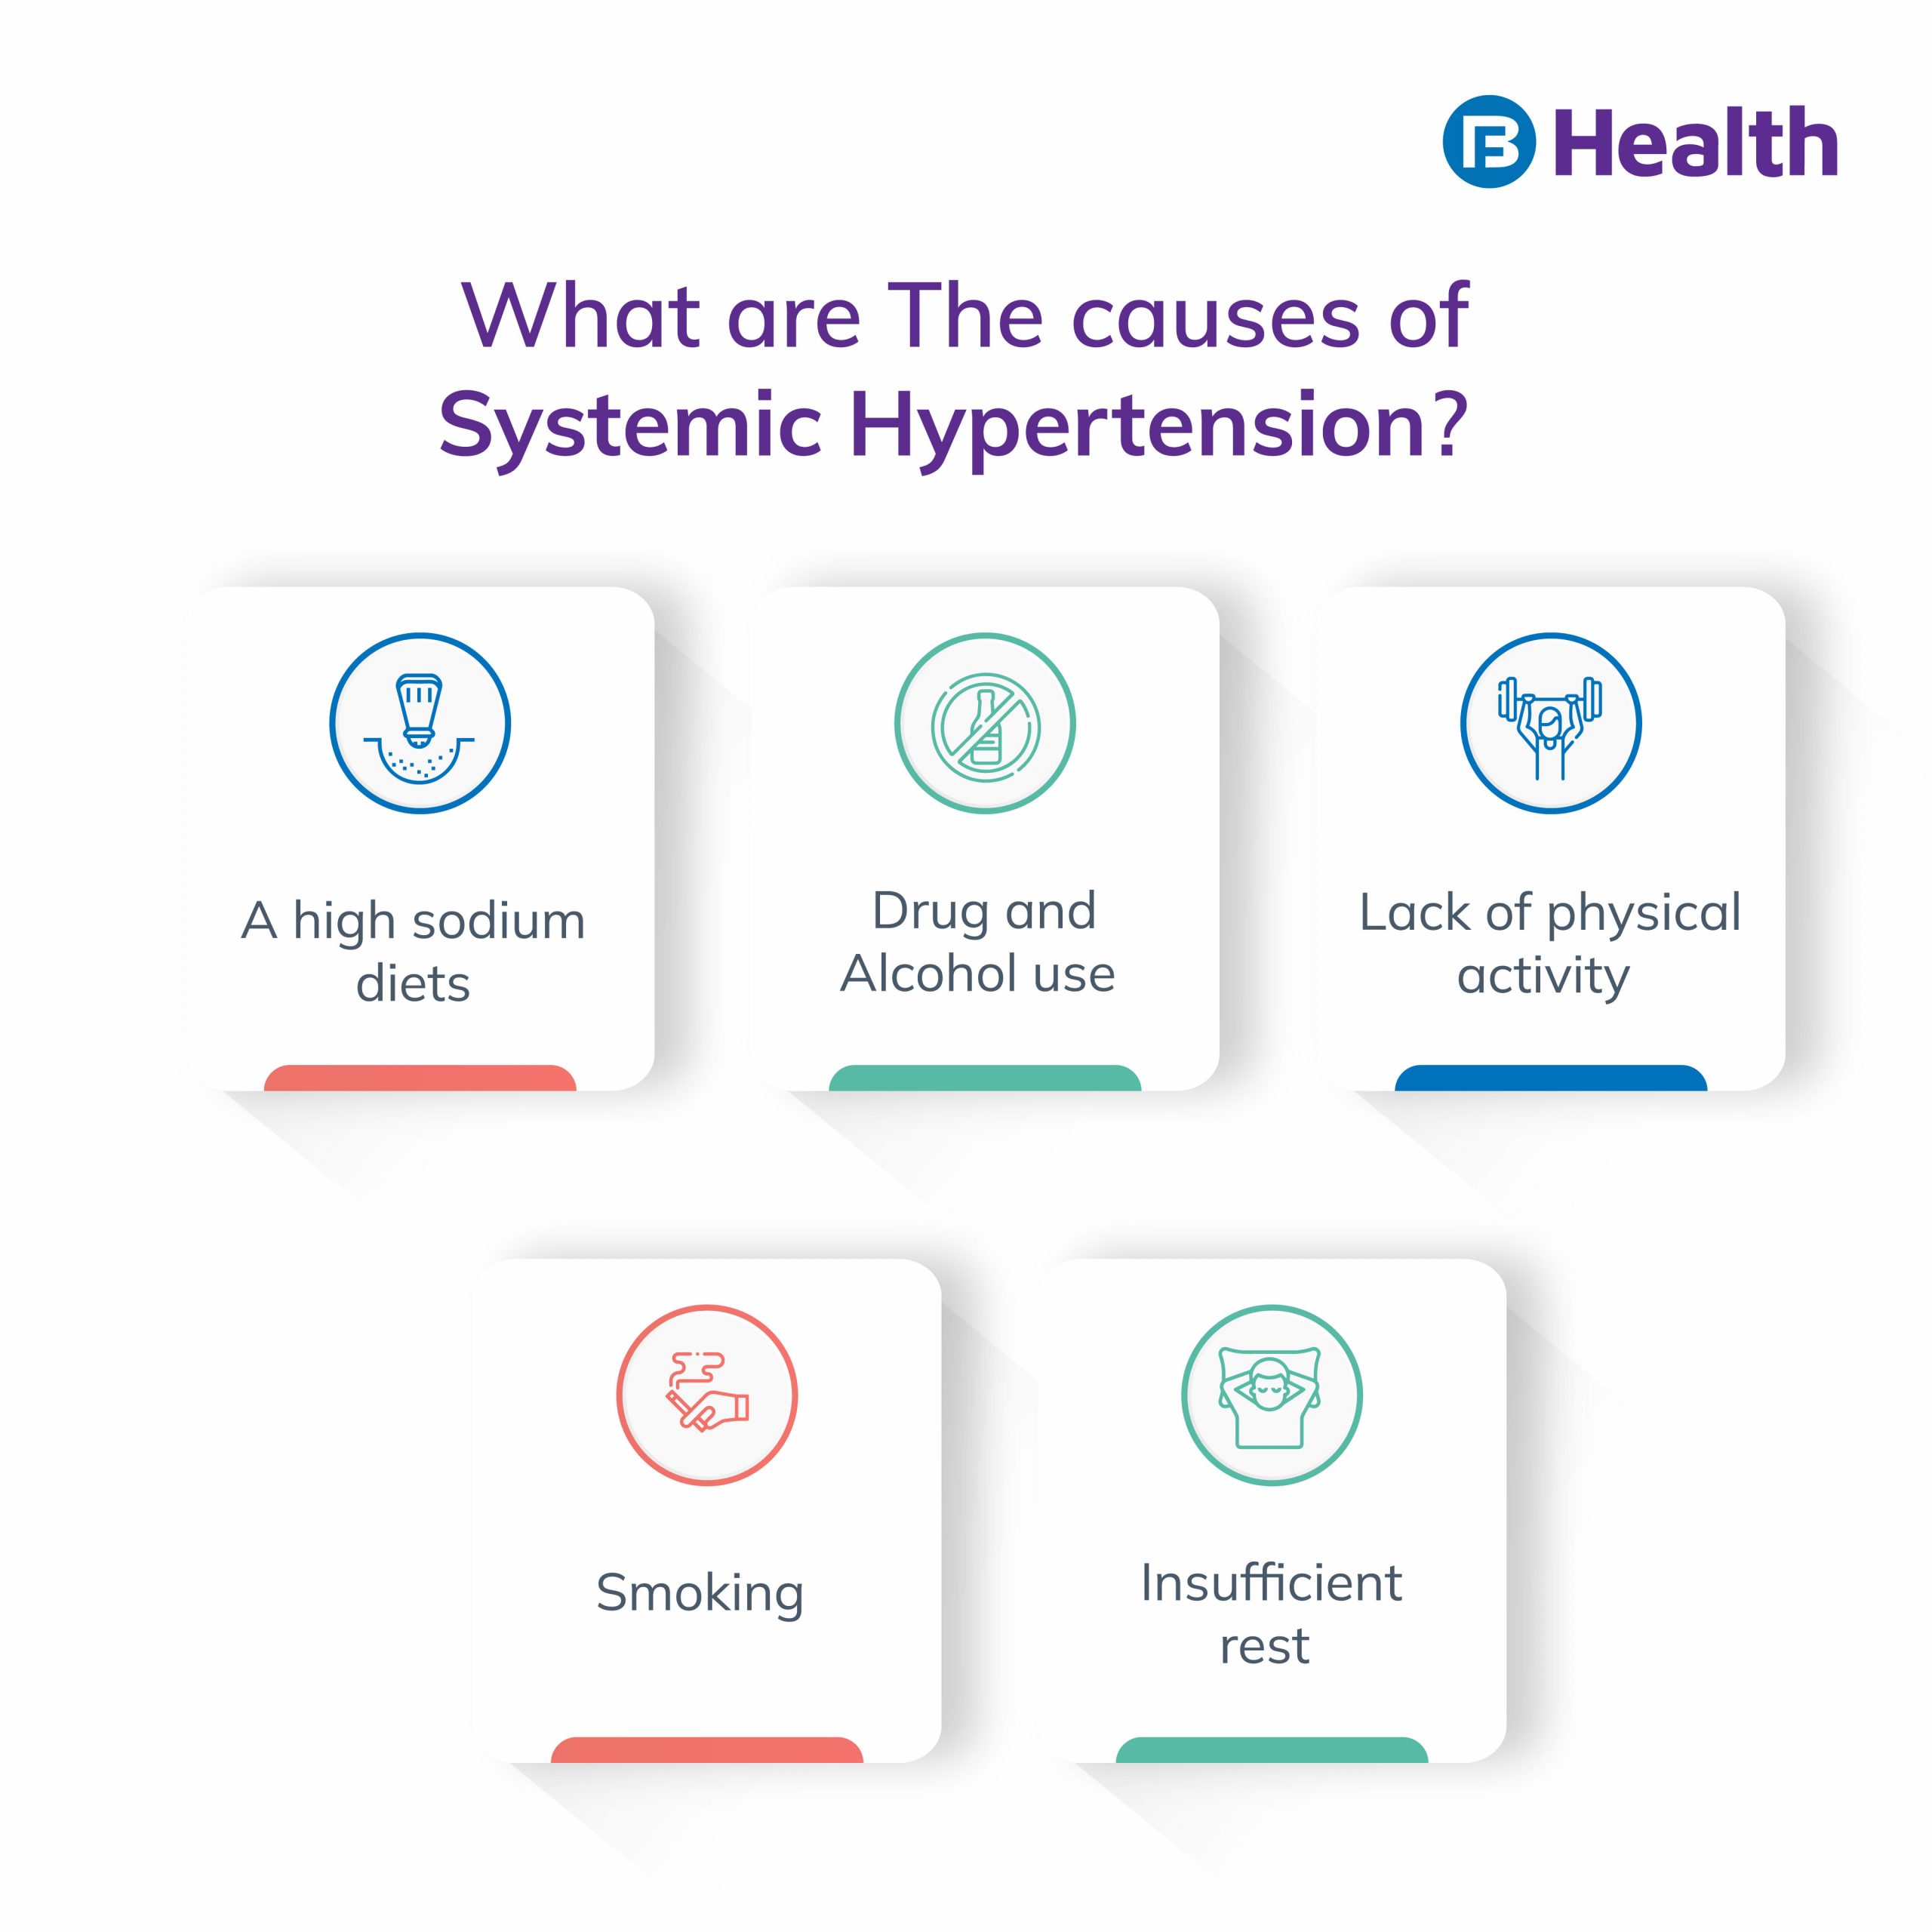 Systemic Hypertension causes